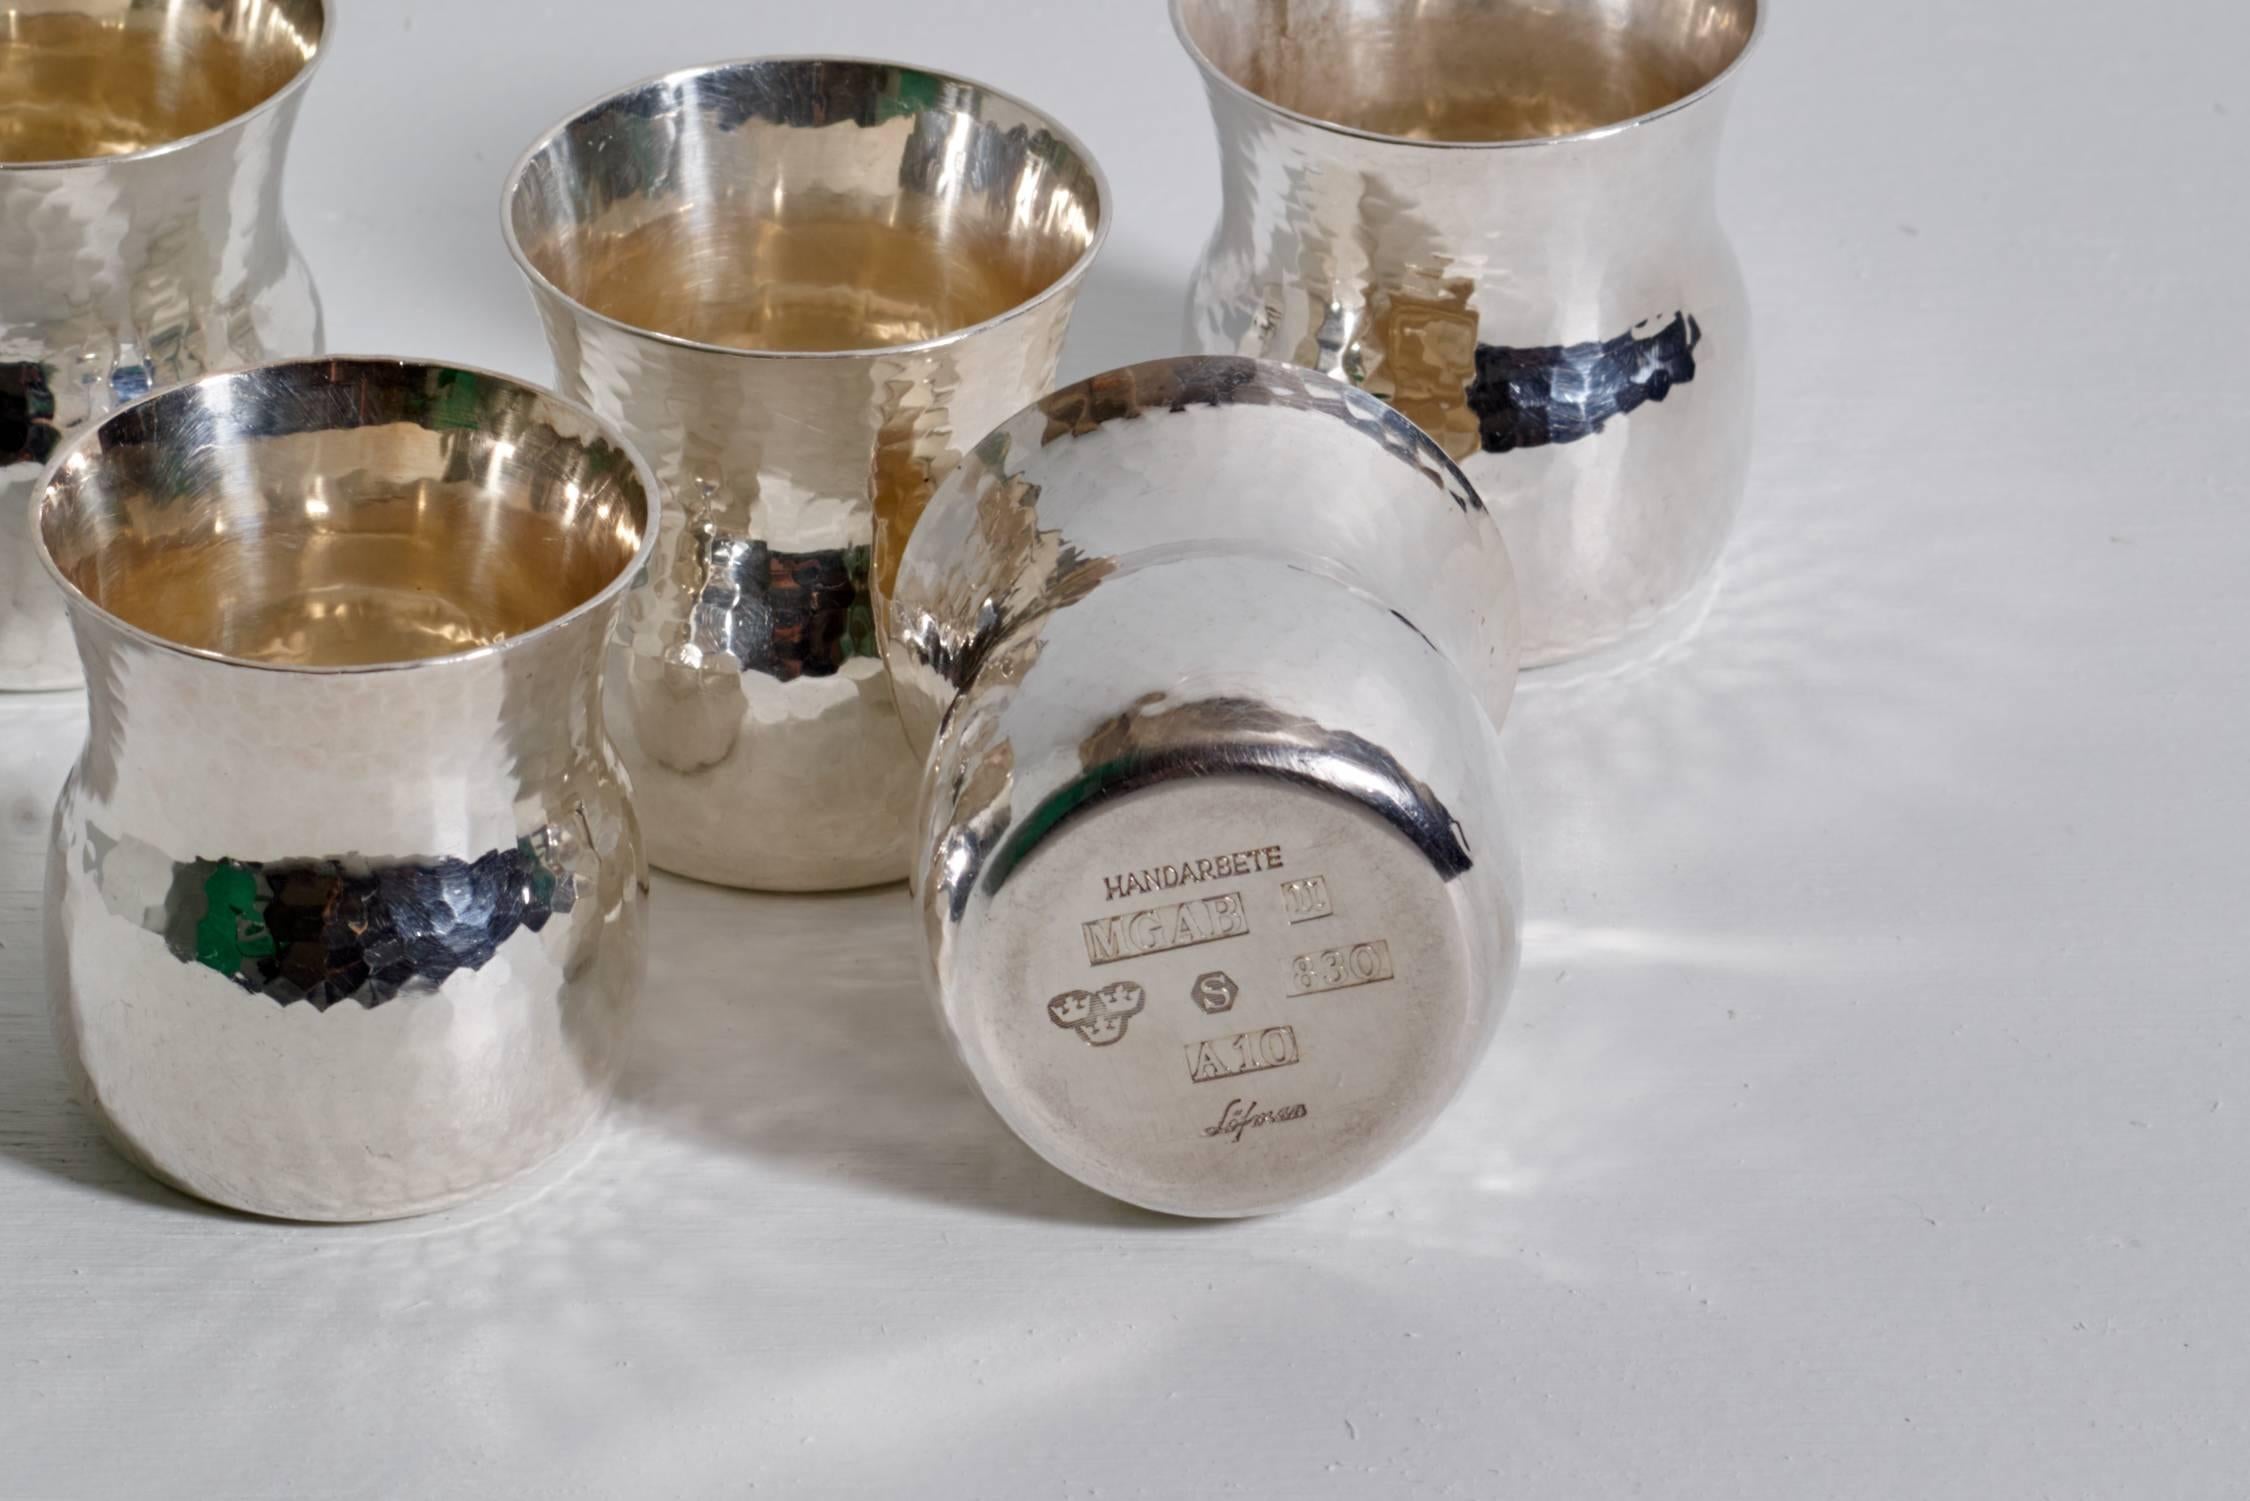 Eric Löfman, set of hand-hammered sterling silver cups with accompanying bowl. Originally designed for service of punch or similar cocktail service. 

Uppsala, Sweden, circa 1974-1975.

Sterling silver, all pieces handmade with hand-hammered